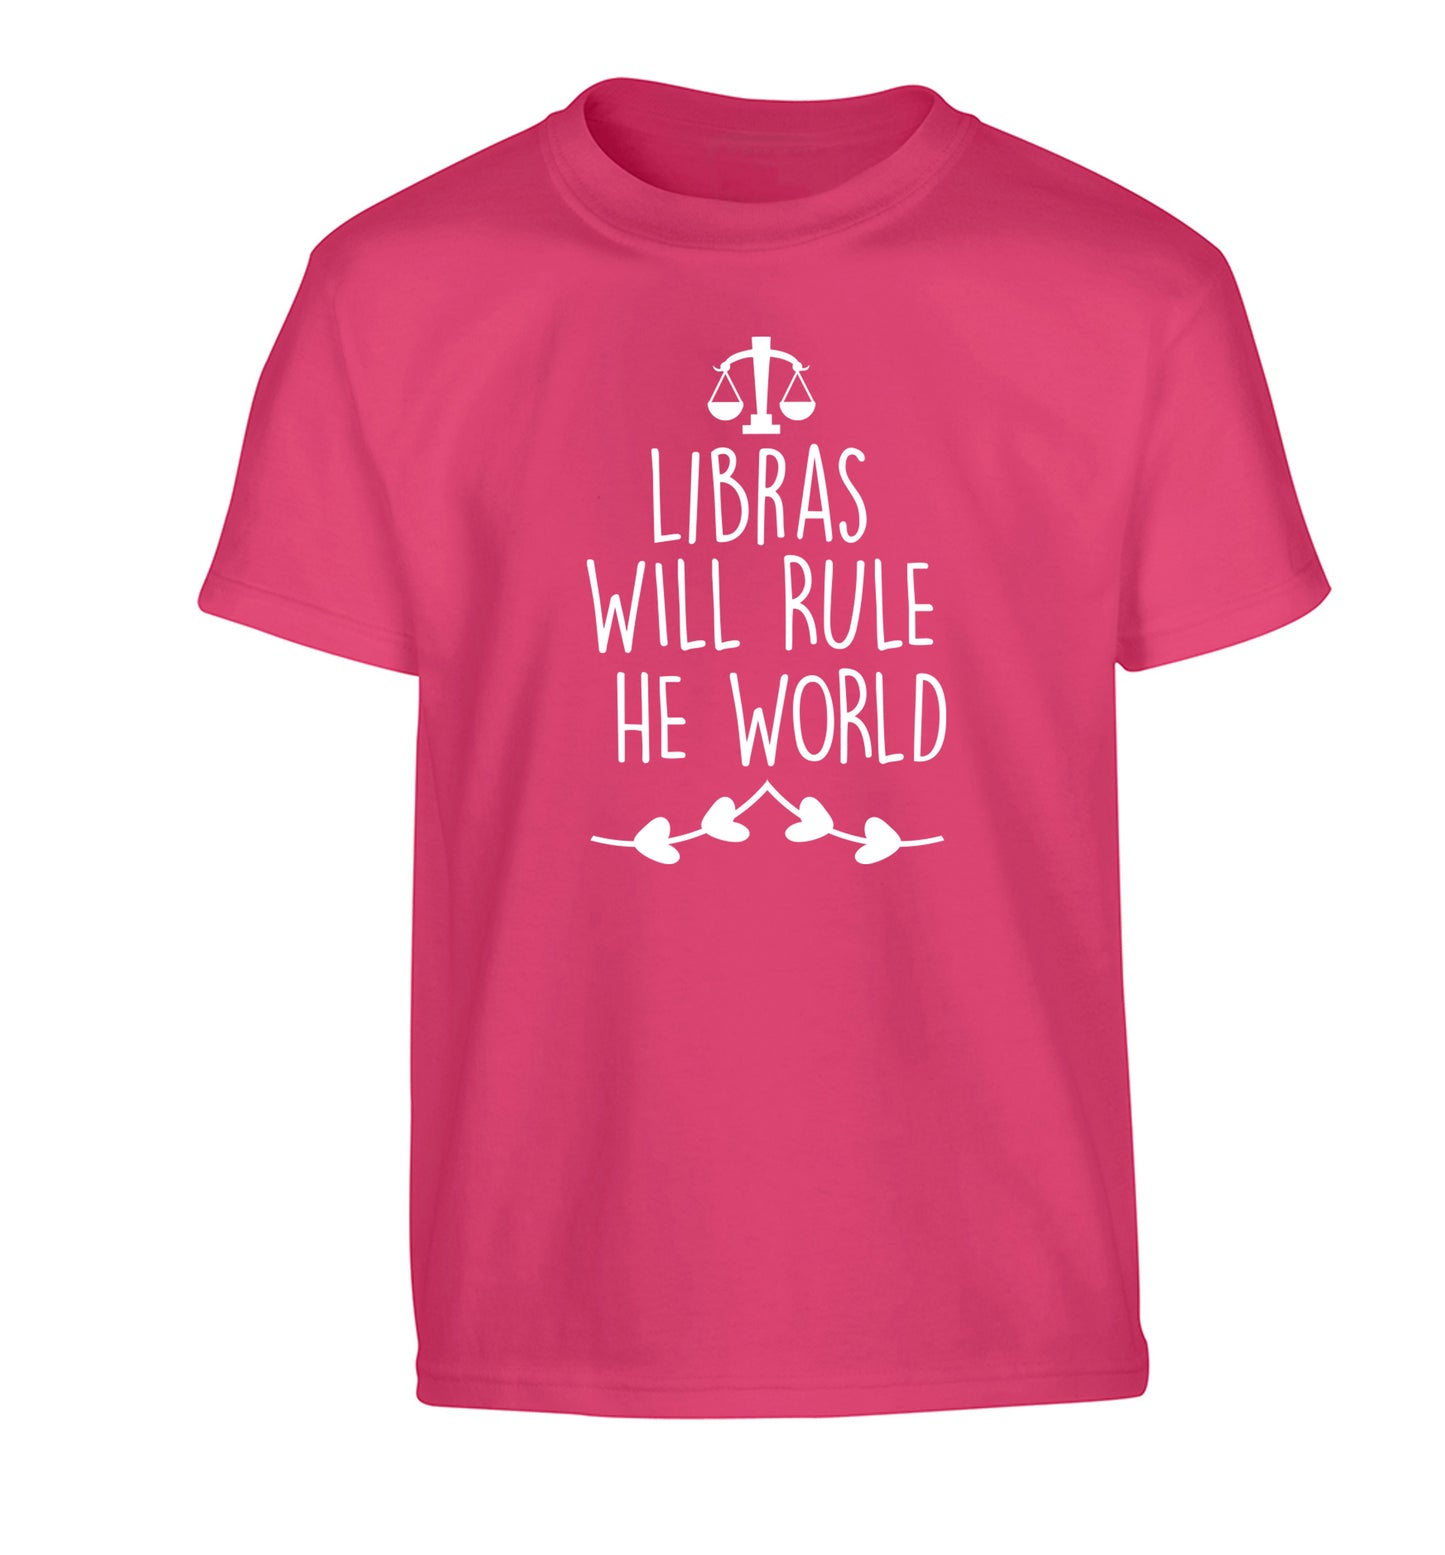 Libras will rule the world Children's pink Tshirt 12-13 Years